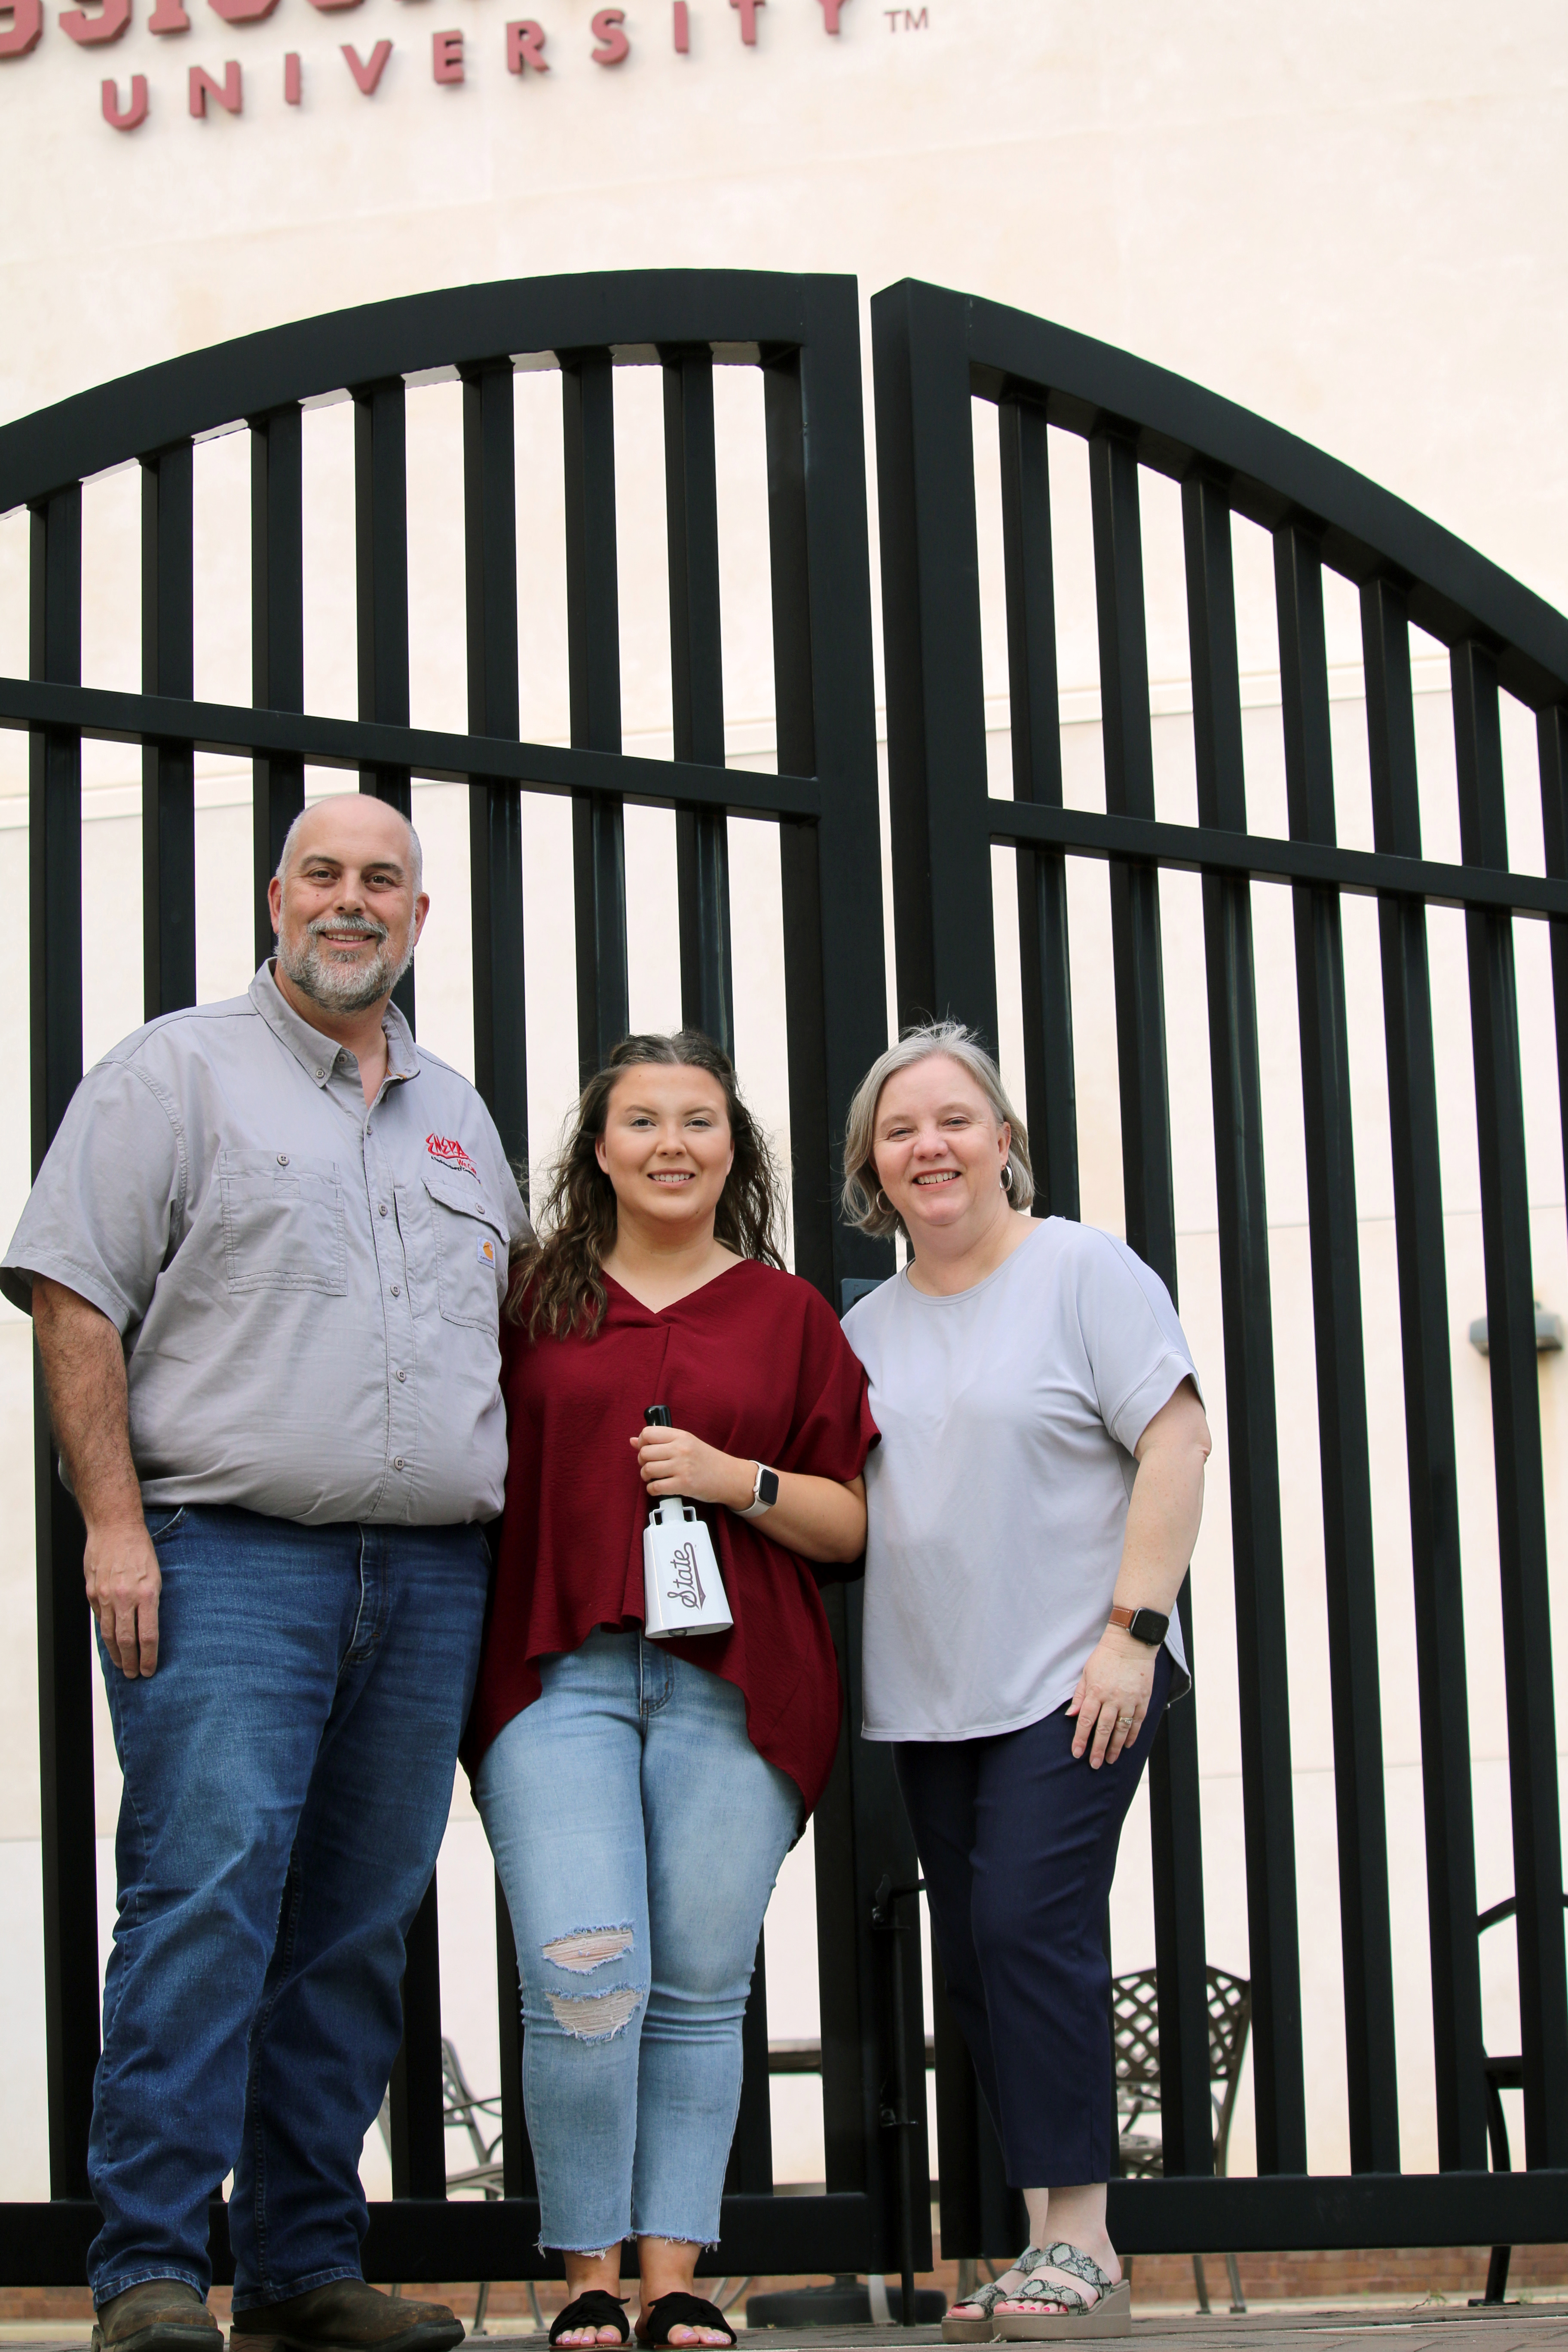 a white male, young woman and middle age woman outside of gates